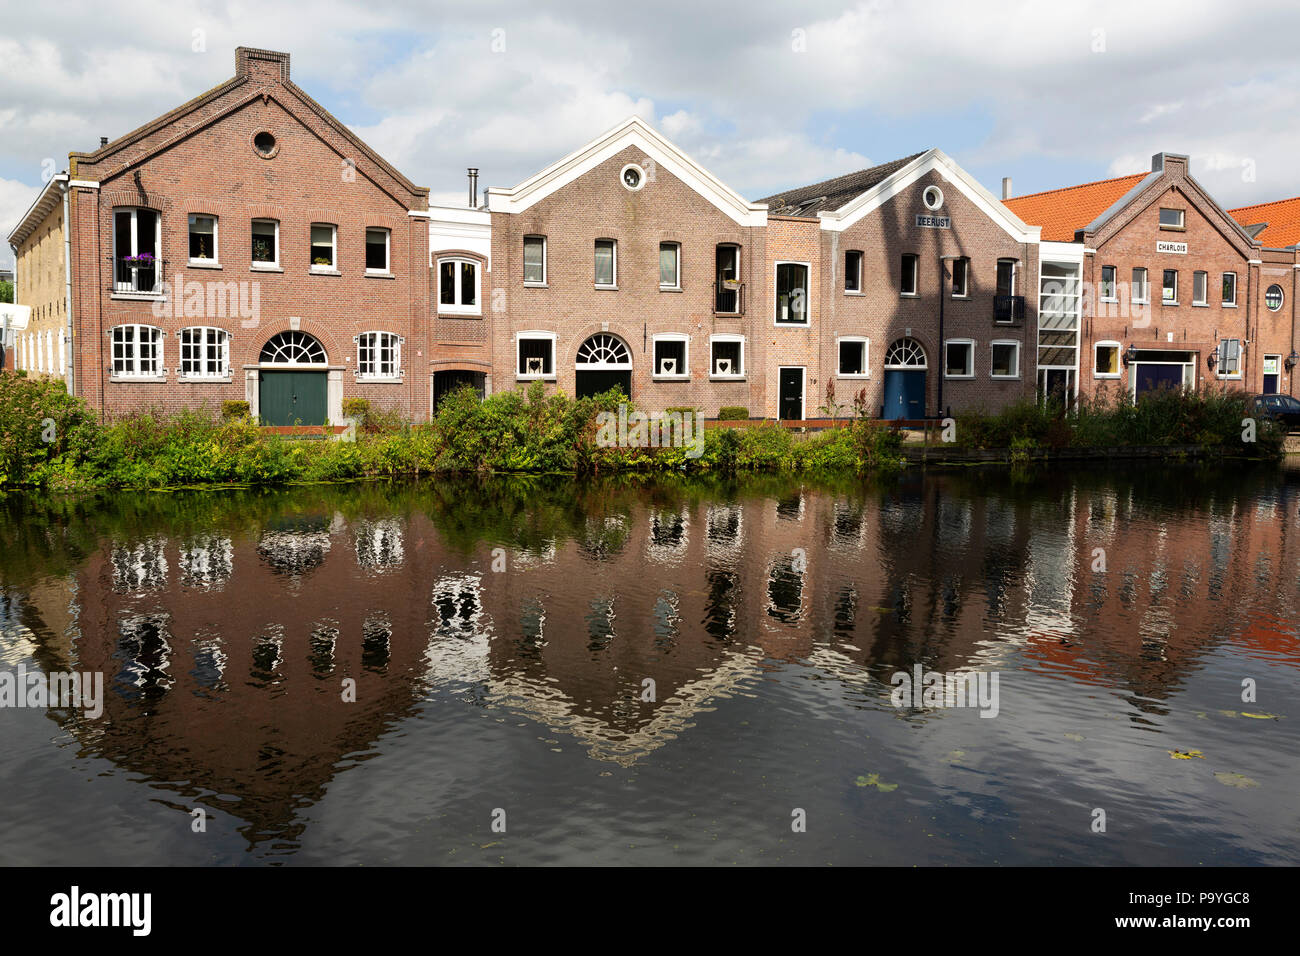 Building facades reflect in the water of the Nordvestsingel at Schiedam, the Netherlands. The canal-side buildings are made of brick. Stock Photo